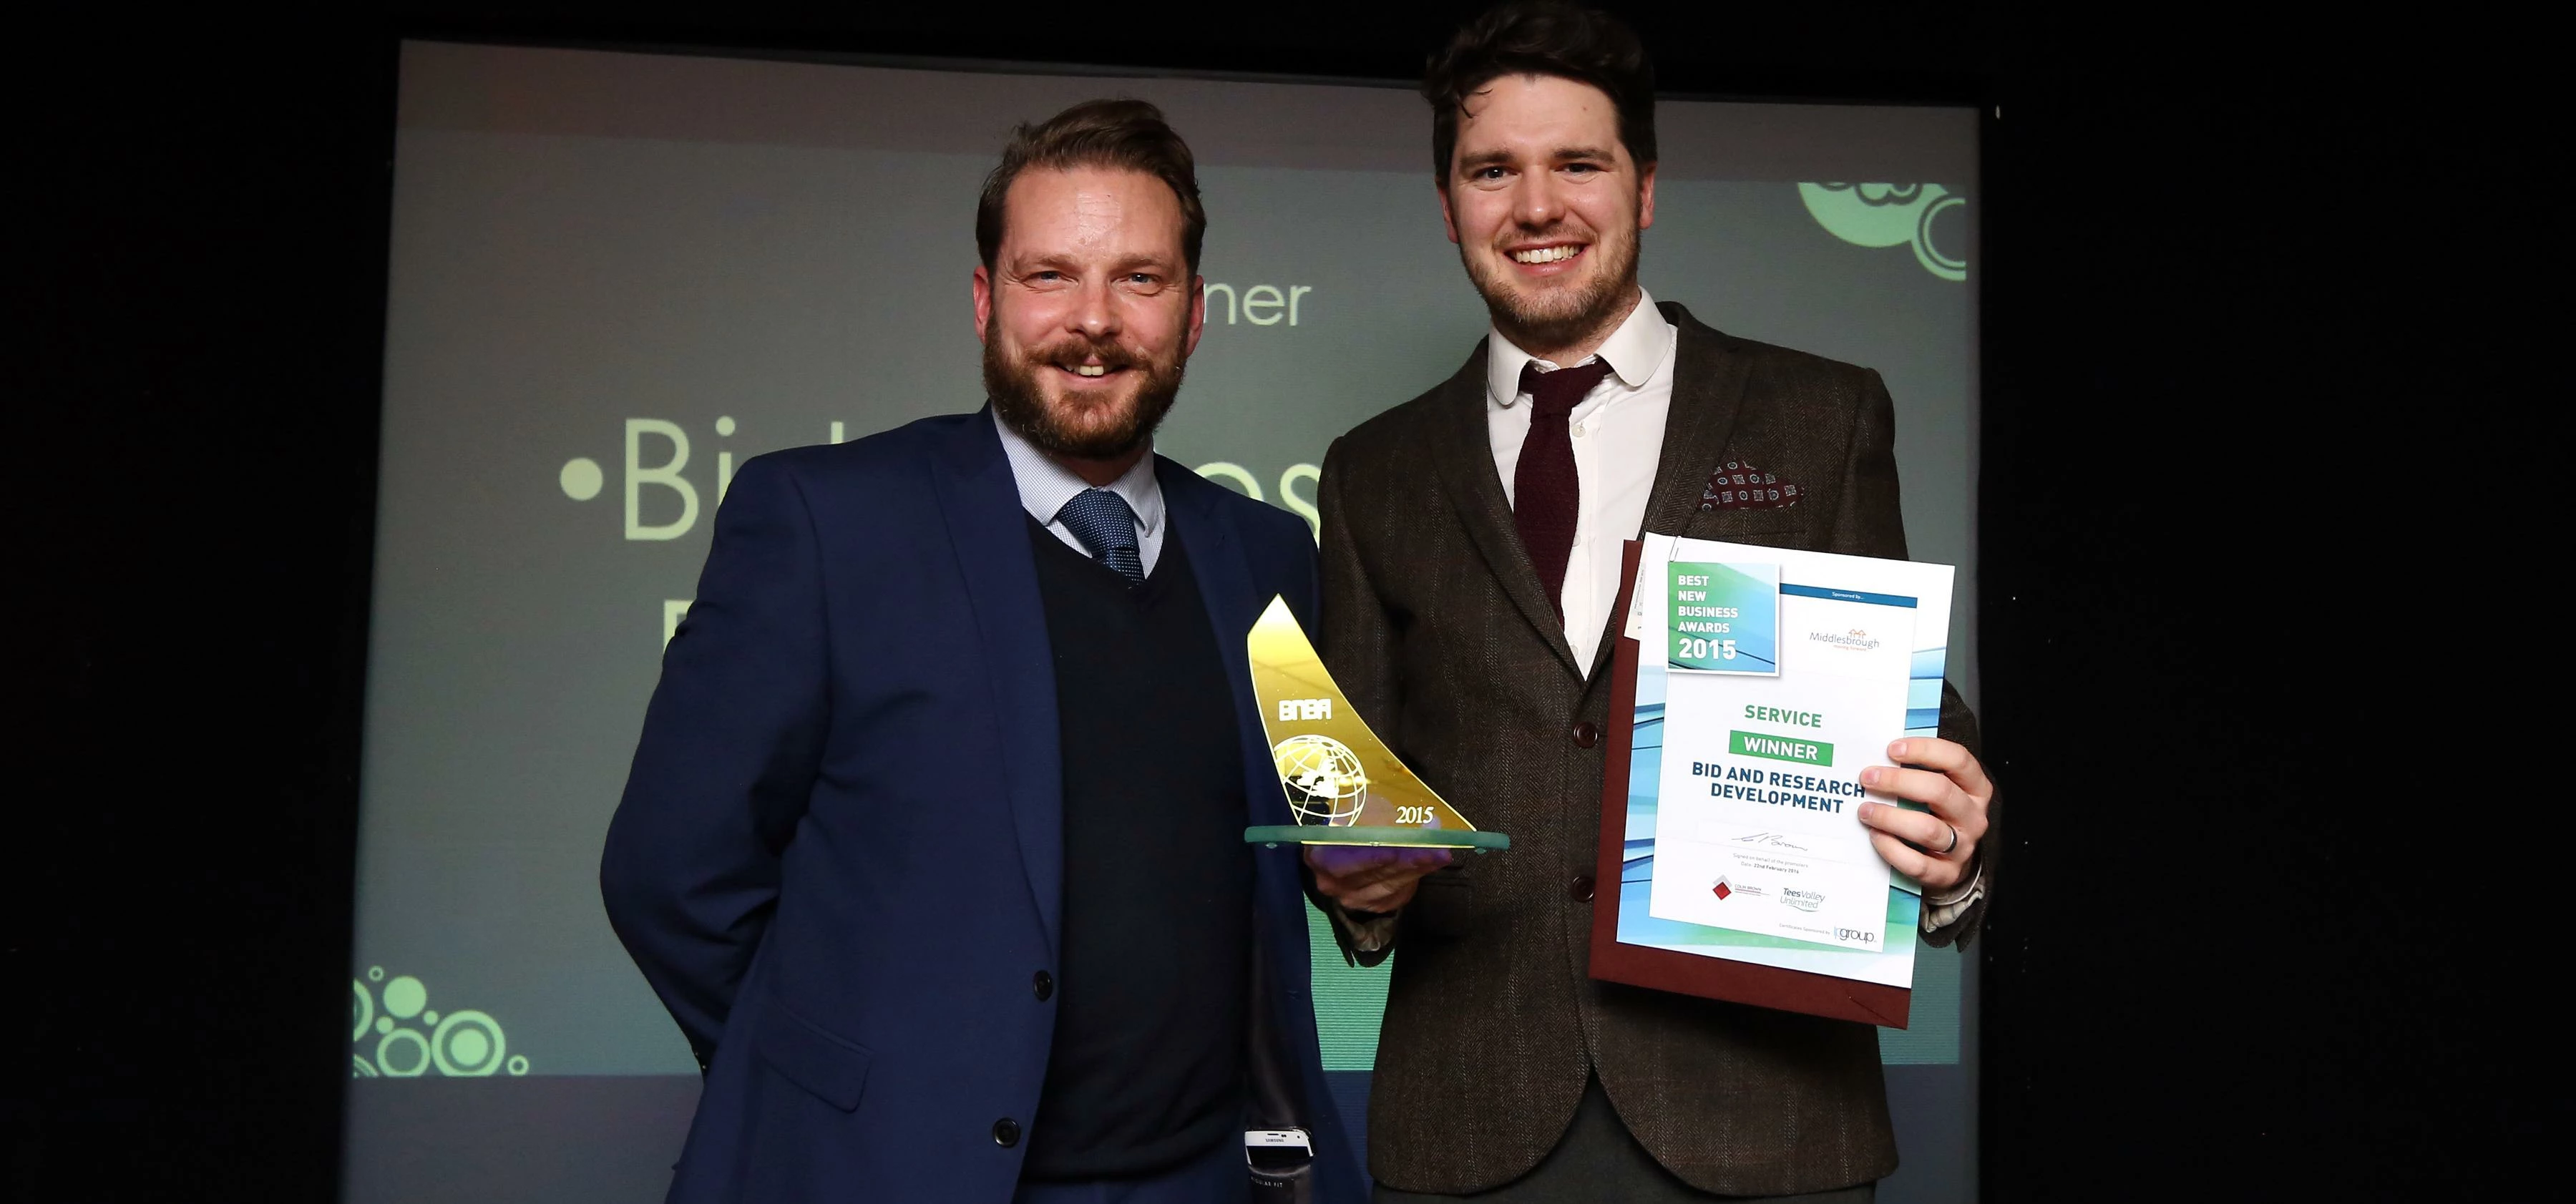 Bid and Research Development won ‘best service provider’ at the Best New Business Awards.